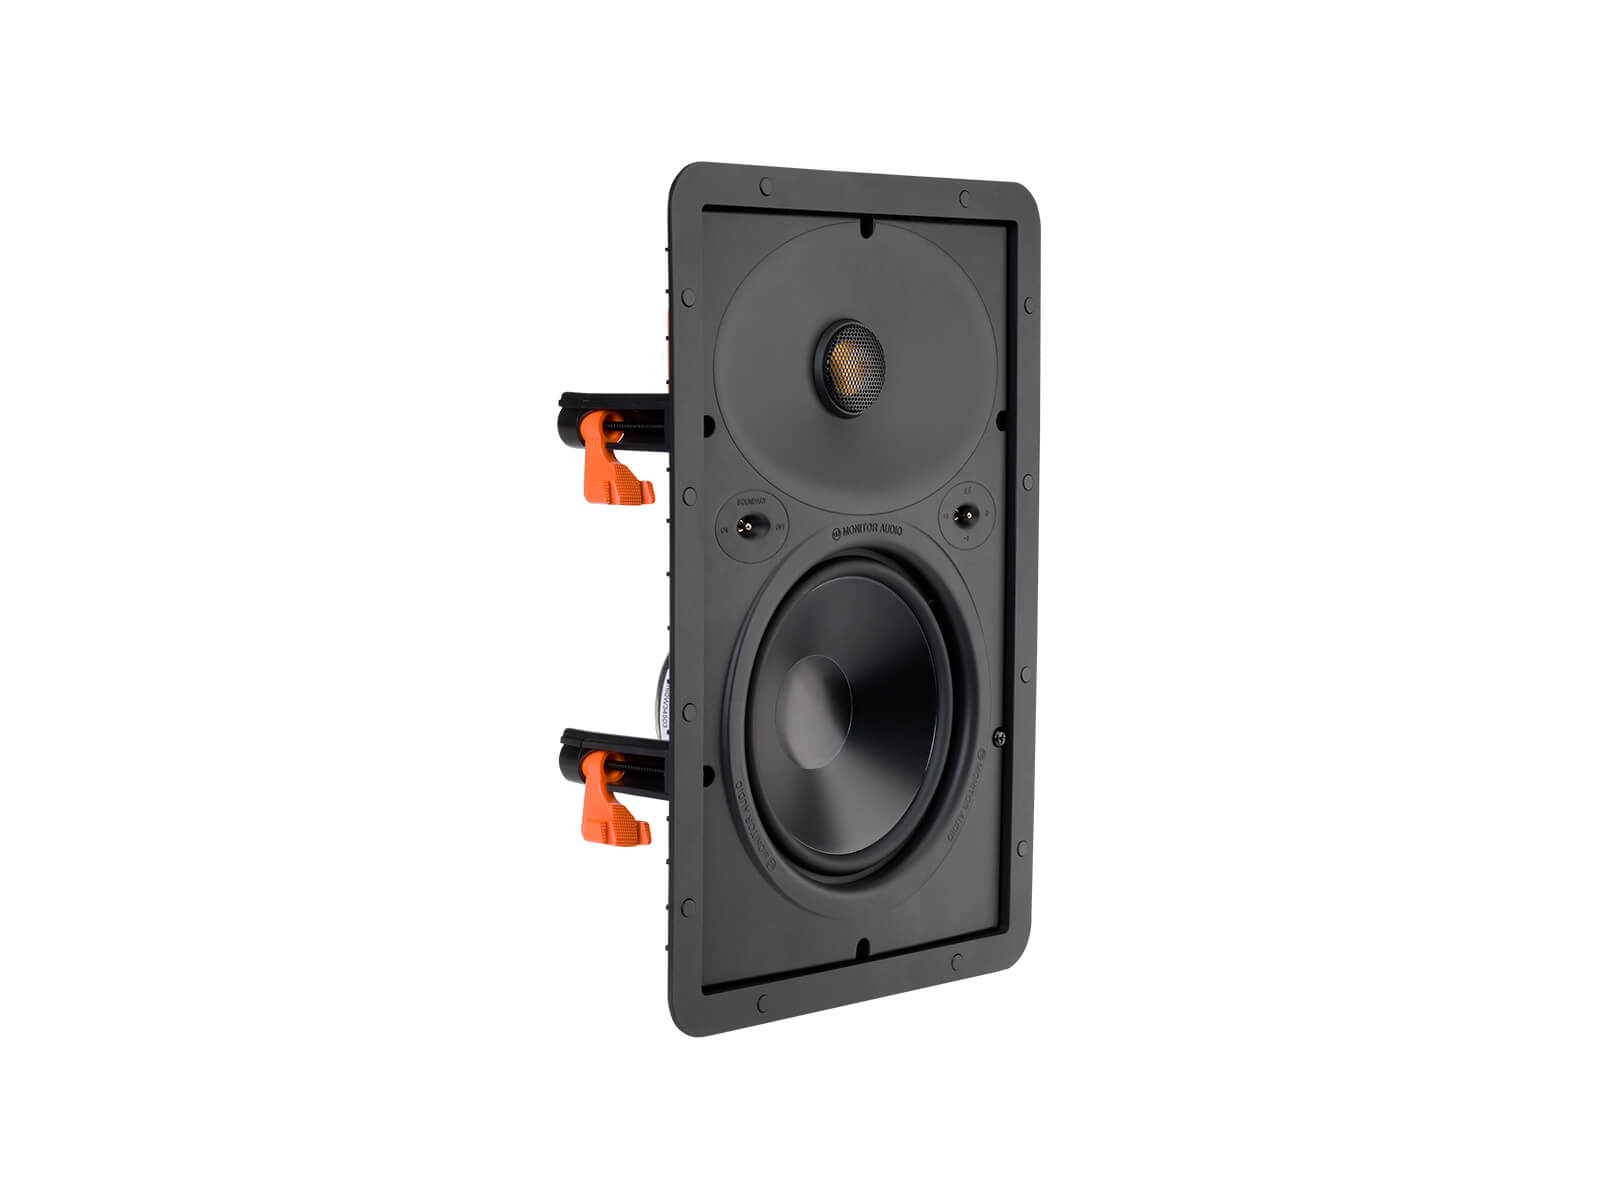 Core W265, front ISO, grille-less in-wall speakers.